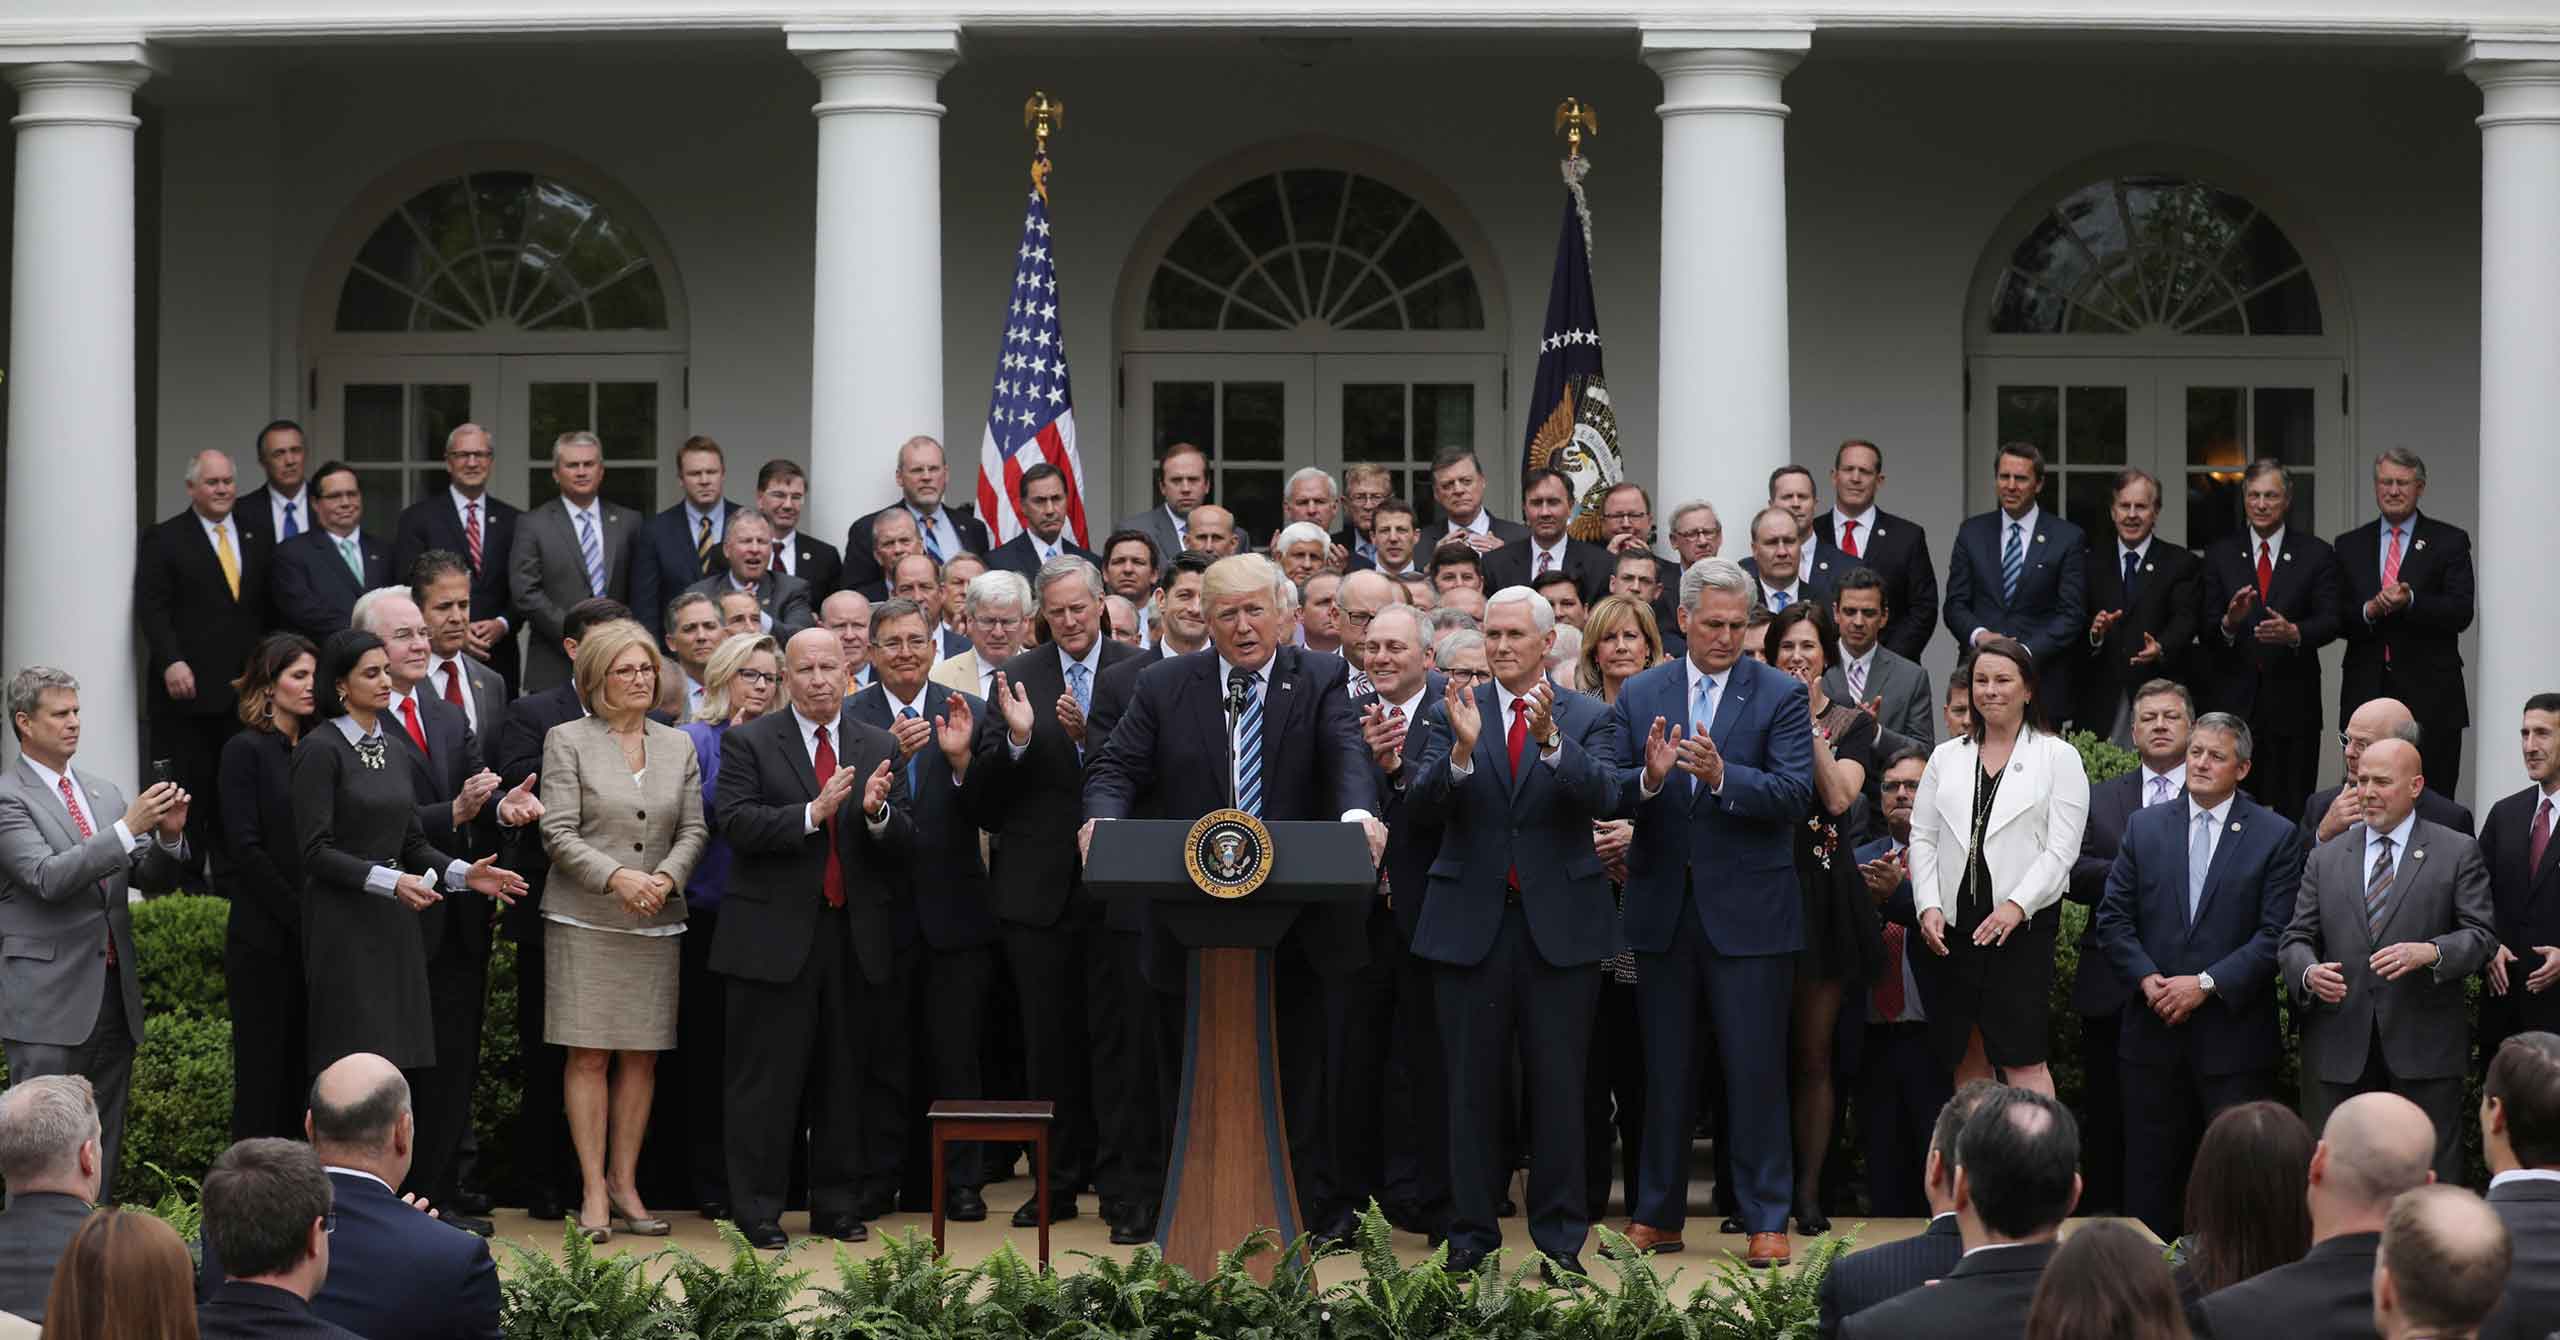 President Trump and House Republicans celebrate House passage of a bill to repeal major parts of the Affordable Care Act.